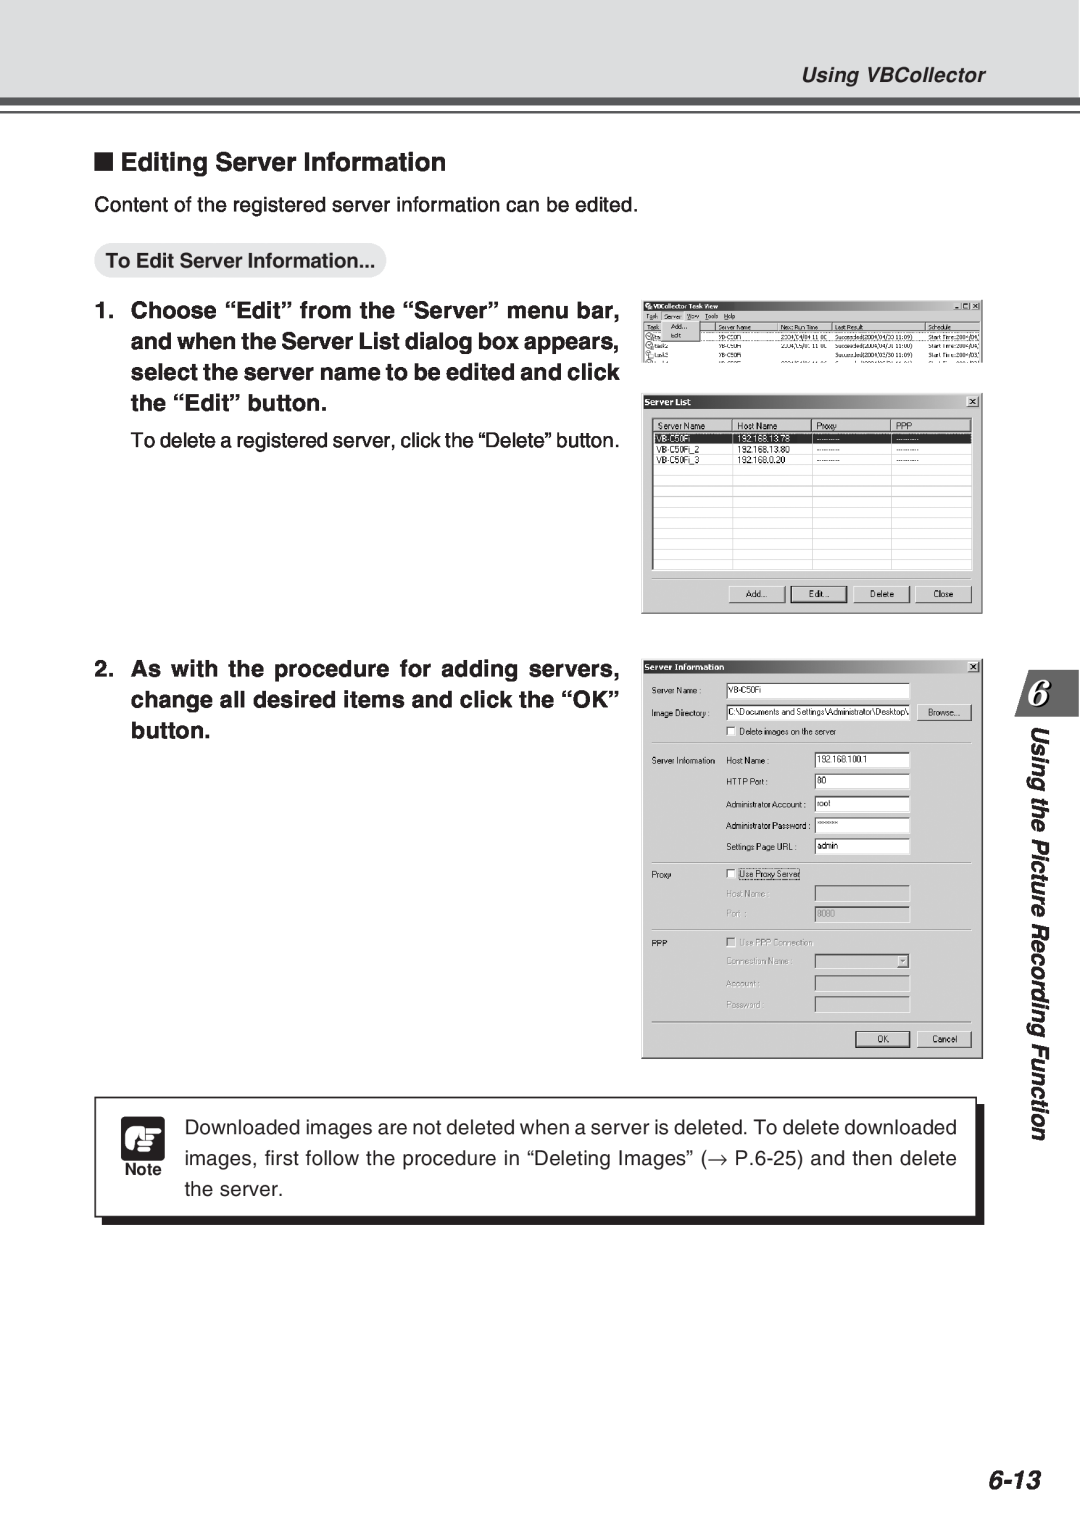 Canon Vb-C50fi user manual Editing Server Information, 6-13, Using the, Picture Recor ding Function 